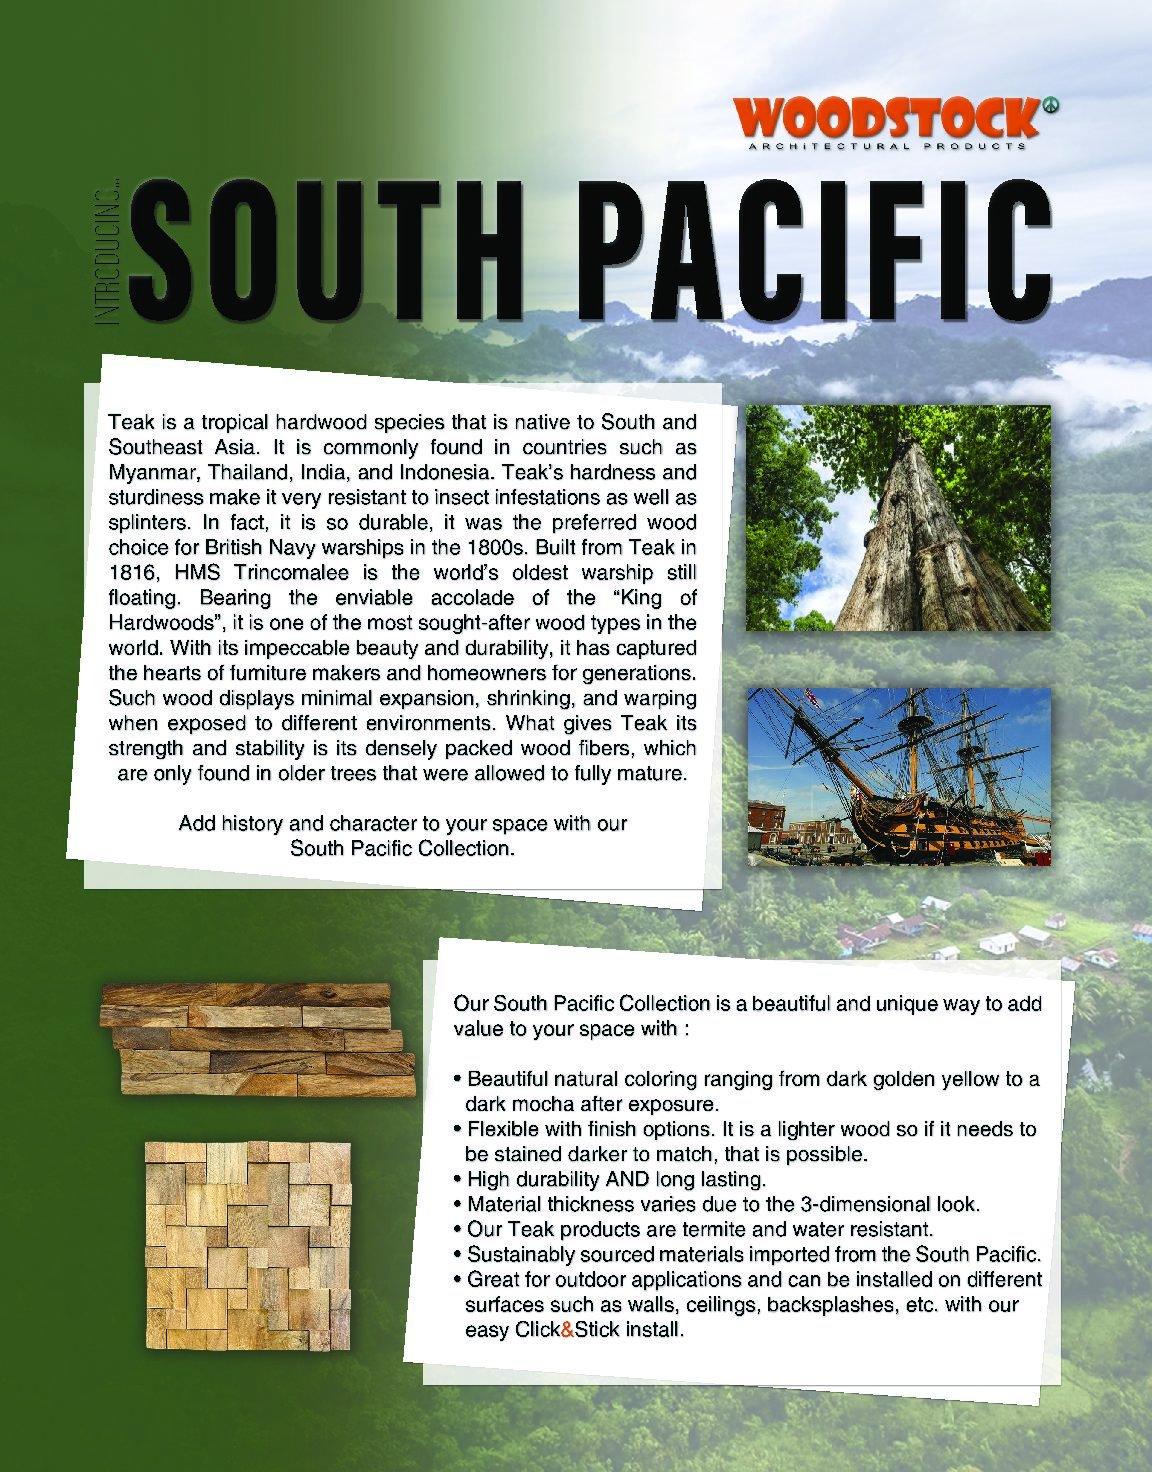 SOUTH PACIFIC COLLECTION